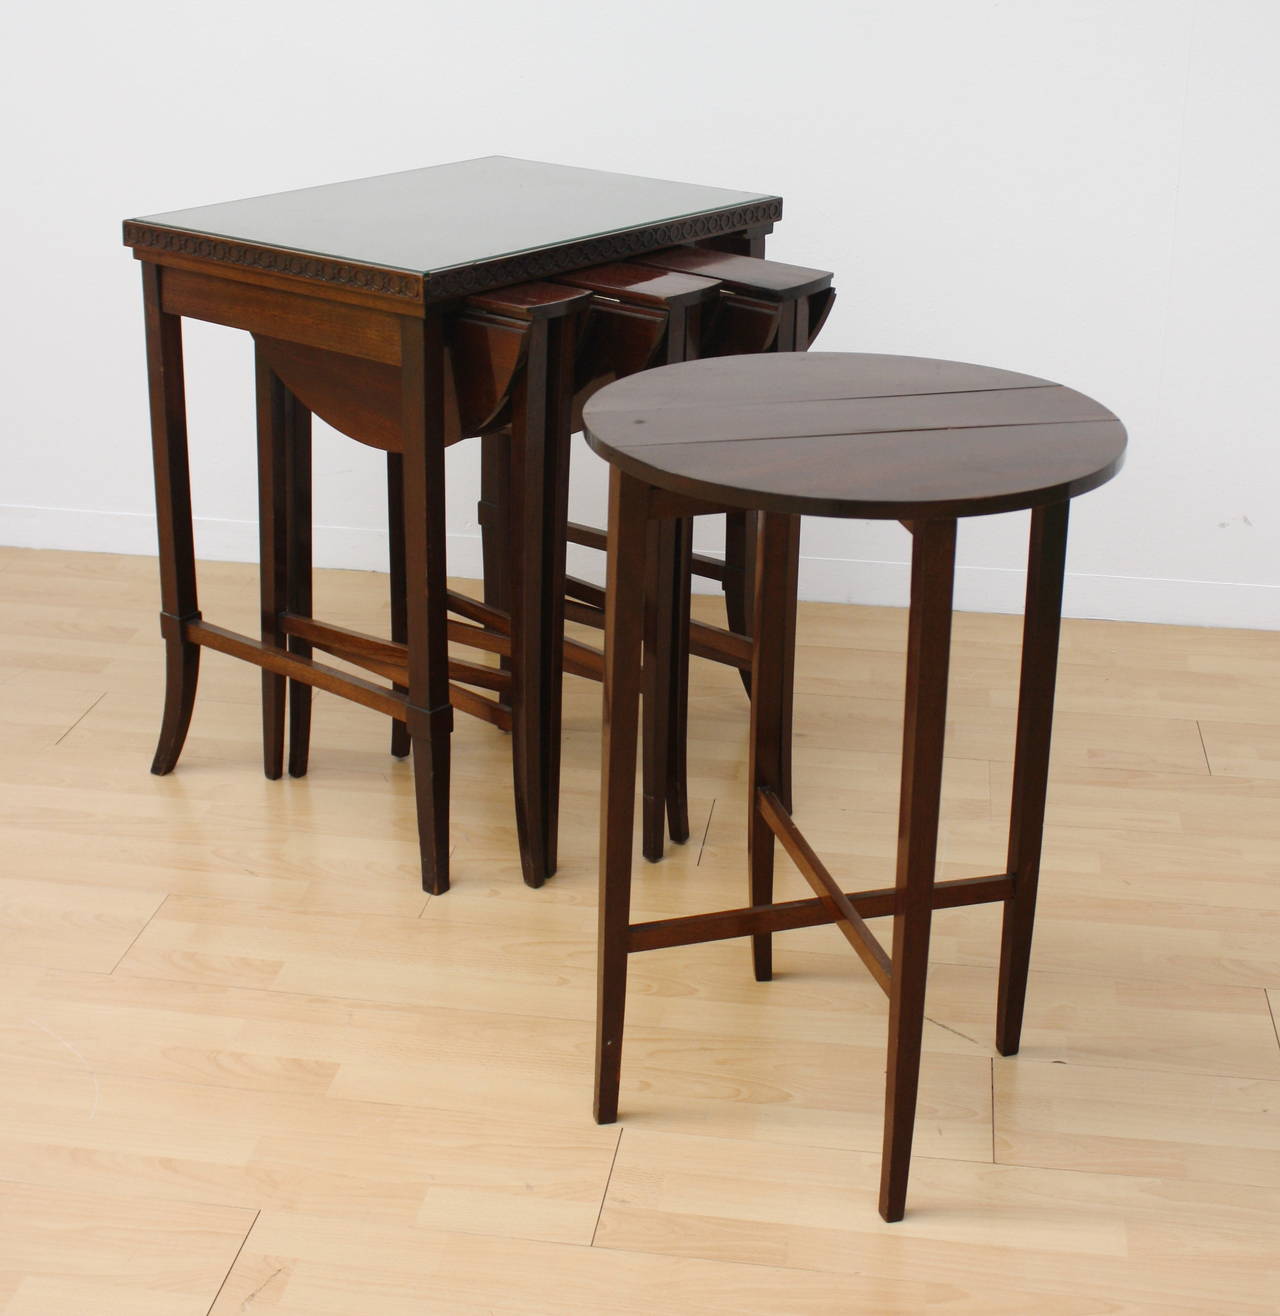 Mahogany Nesting Tables In Good Condition For Sale In Wels, AT